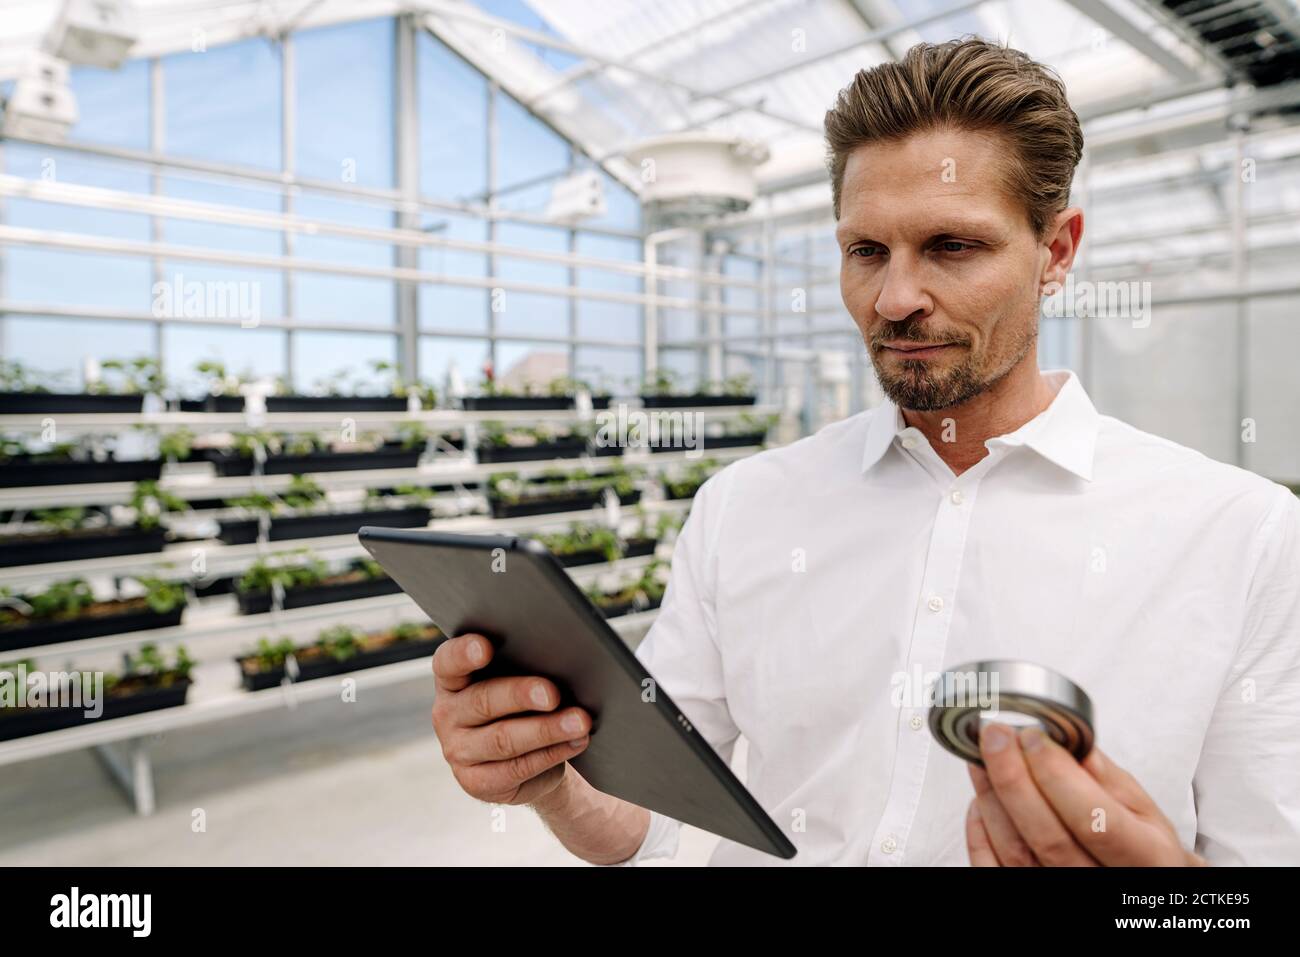 Close-up of businessman holding work tool using digital tablet in greenhouse Stock Photo